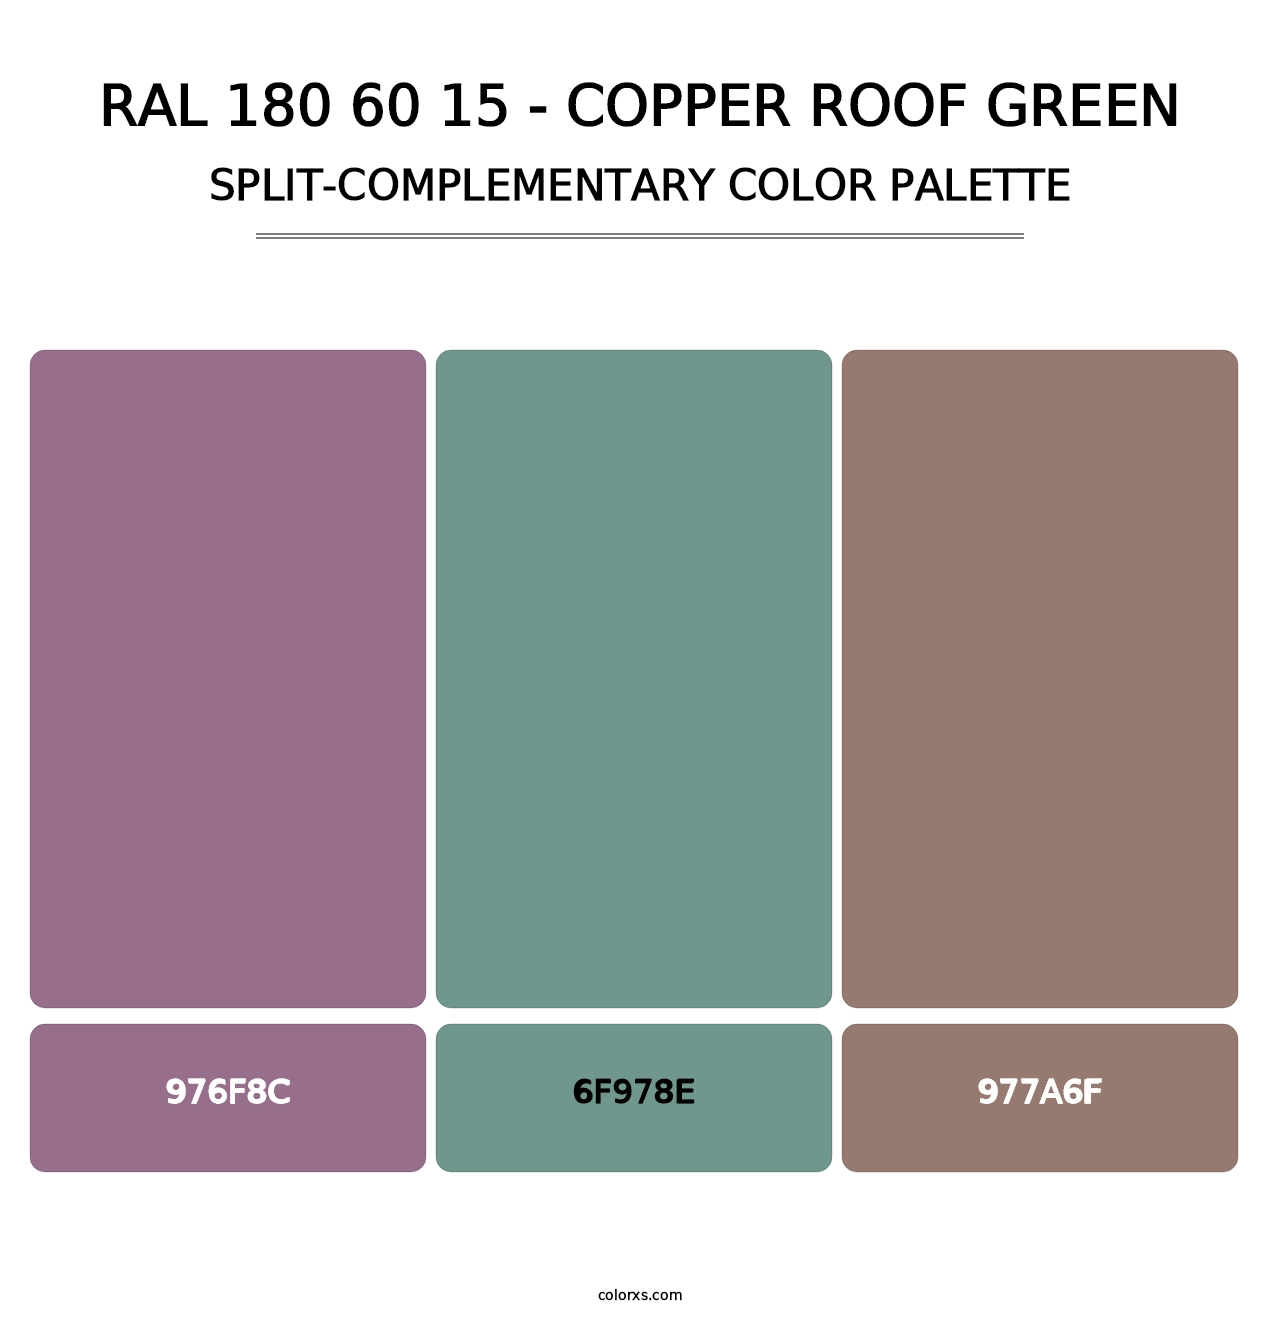 RAL 180 60 15 - Copper Roof Green - Split-Complementary Color Palette